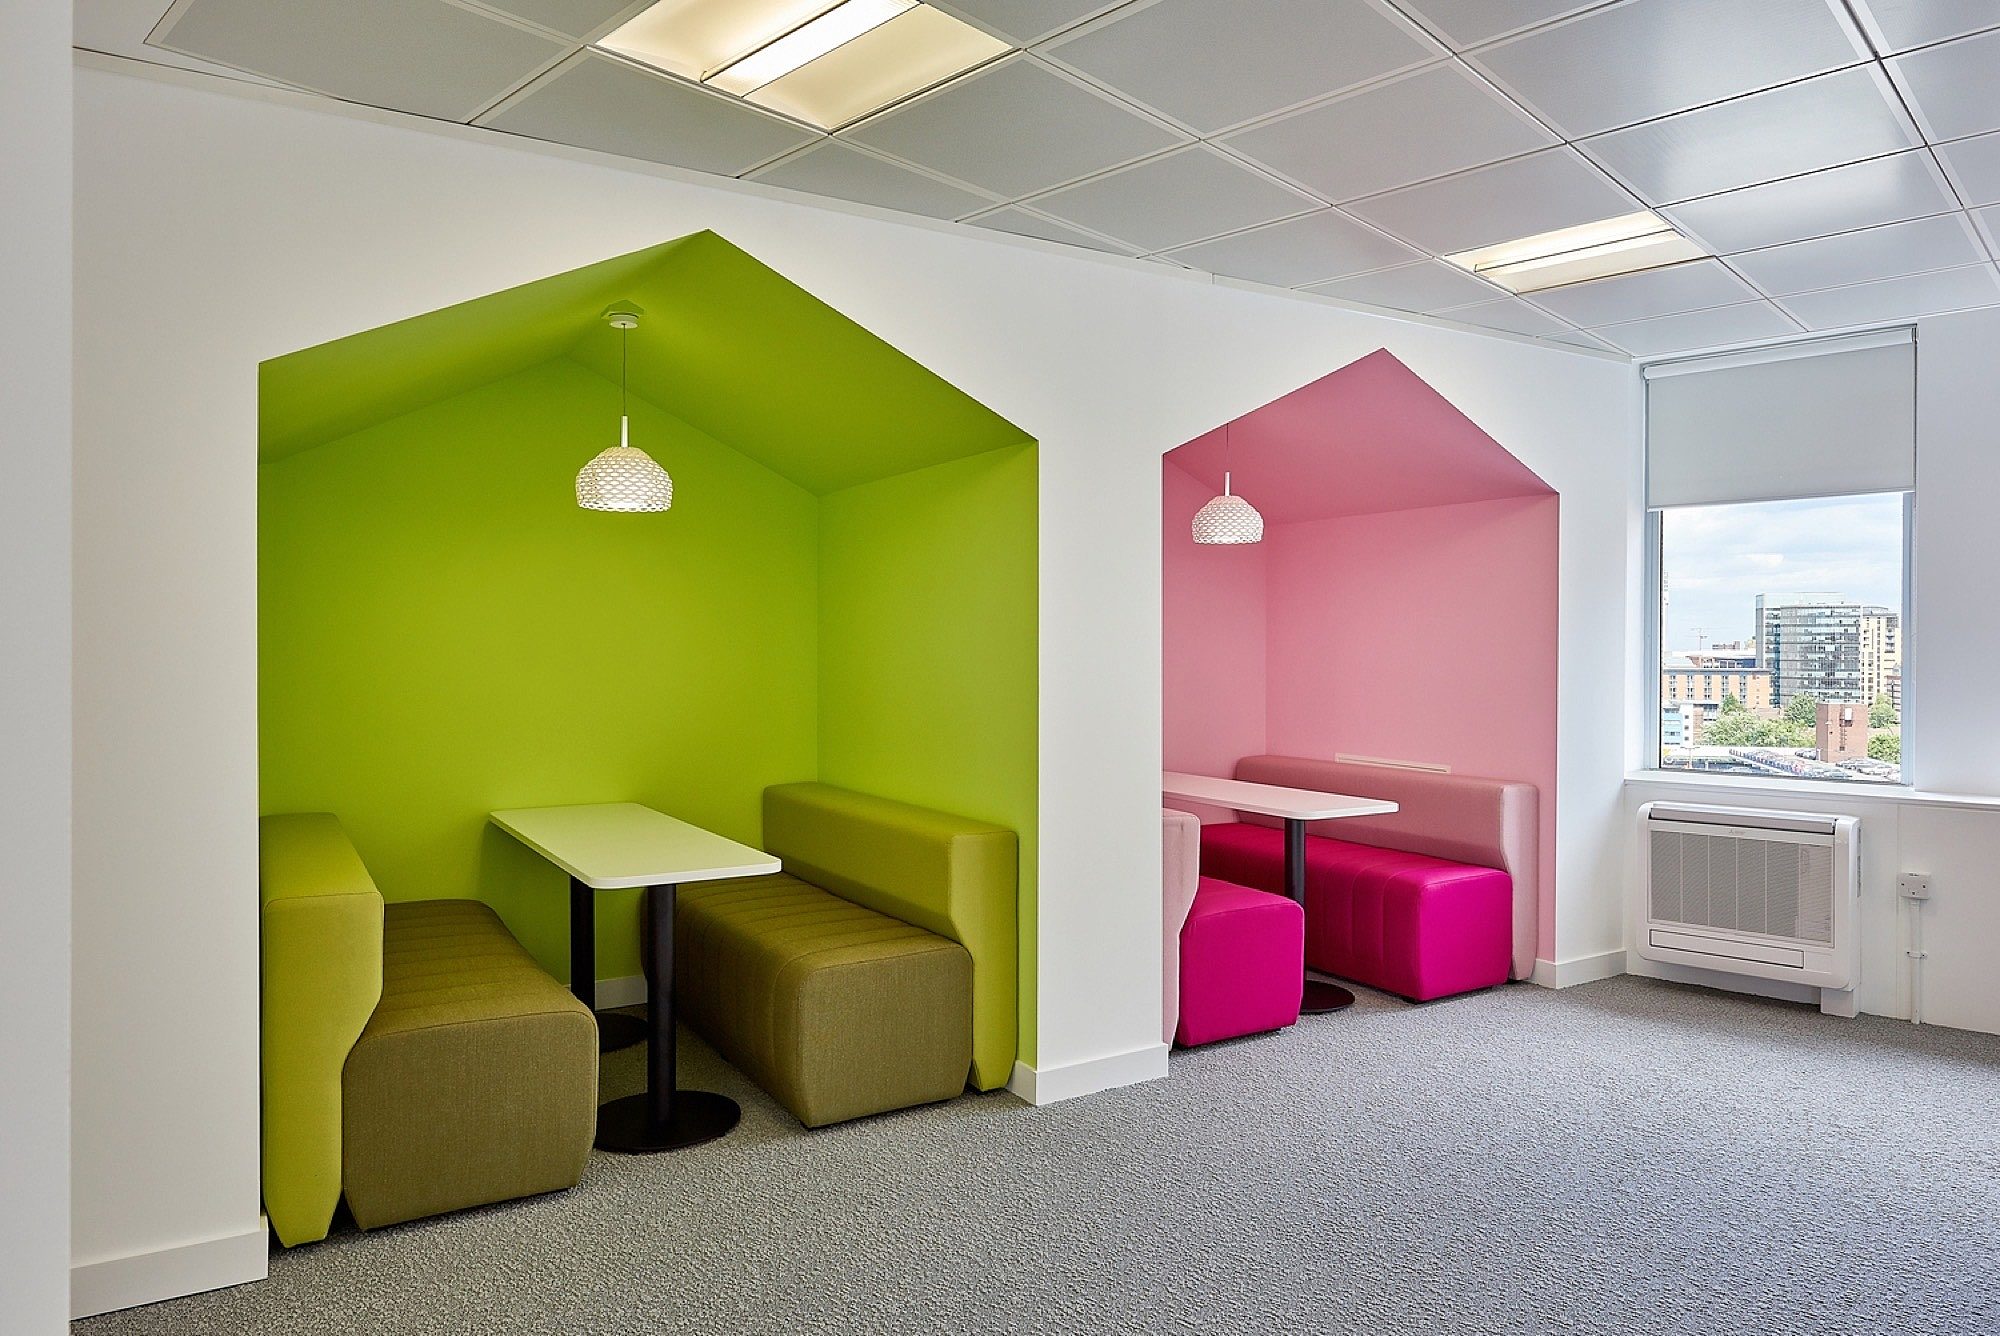 Alzheimers Society meeting pod fit out